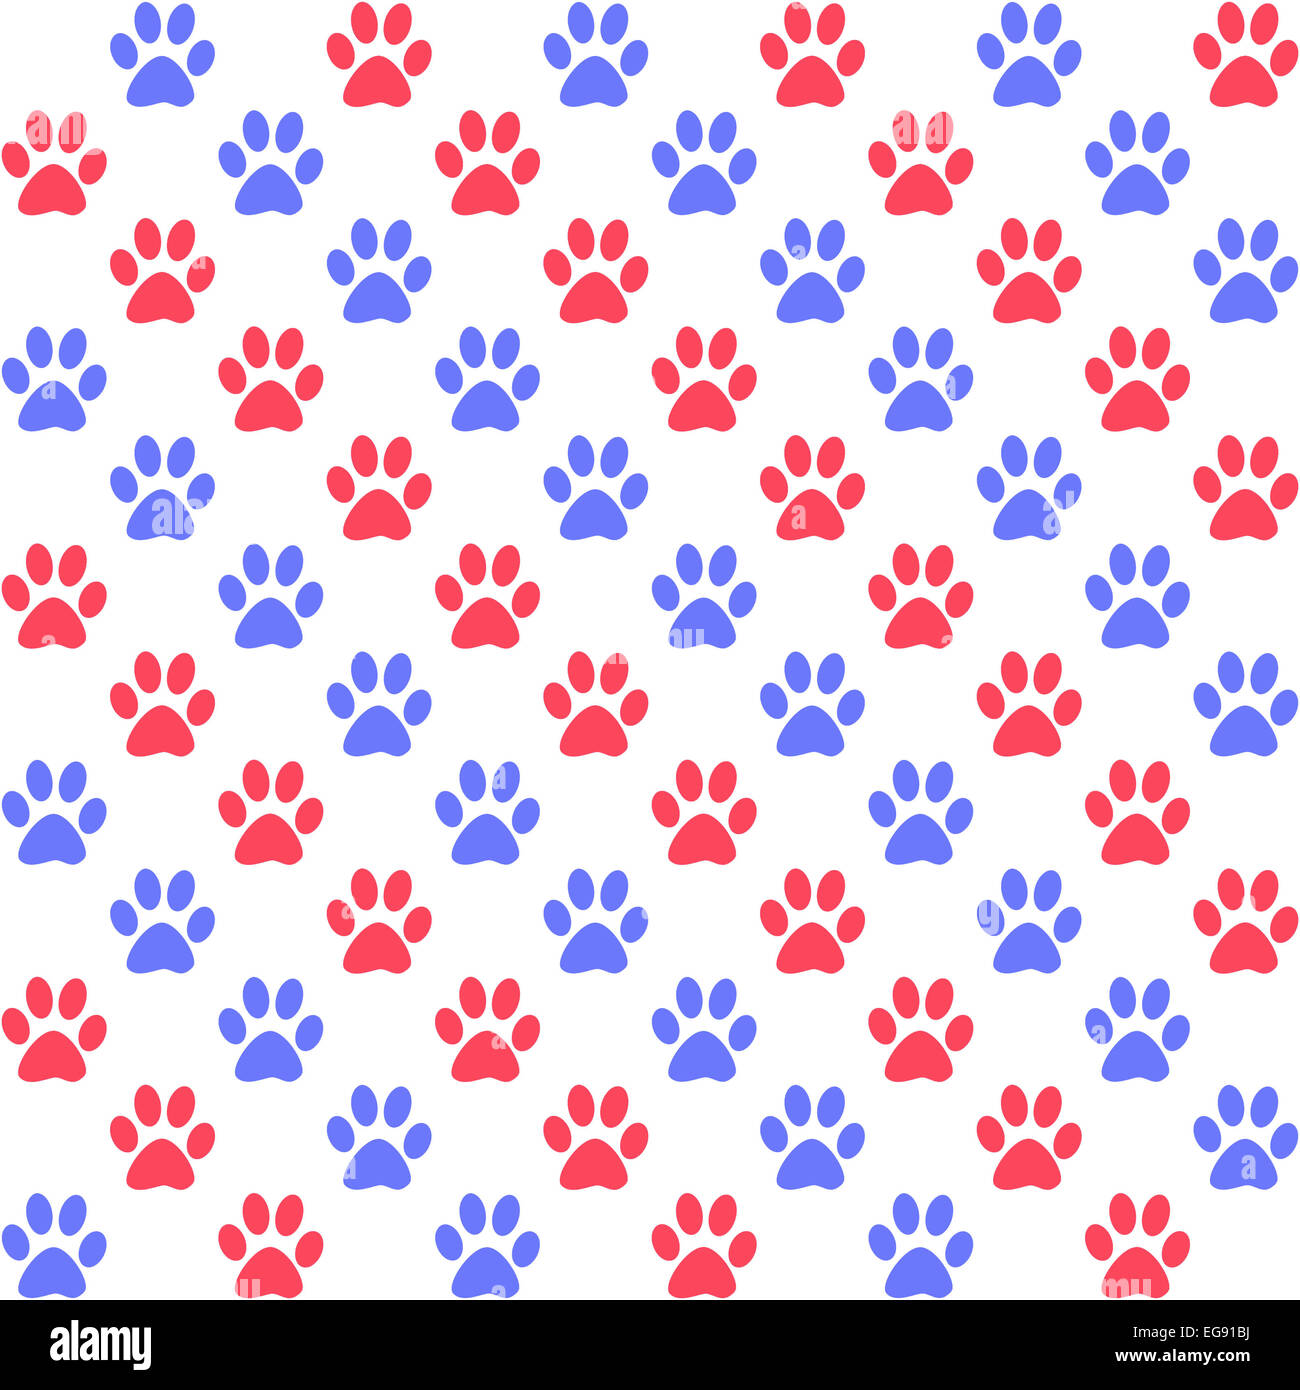 Paw prints in red and blue on white, a seamless background pattern Stock Photo